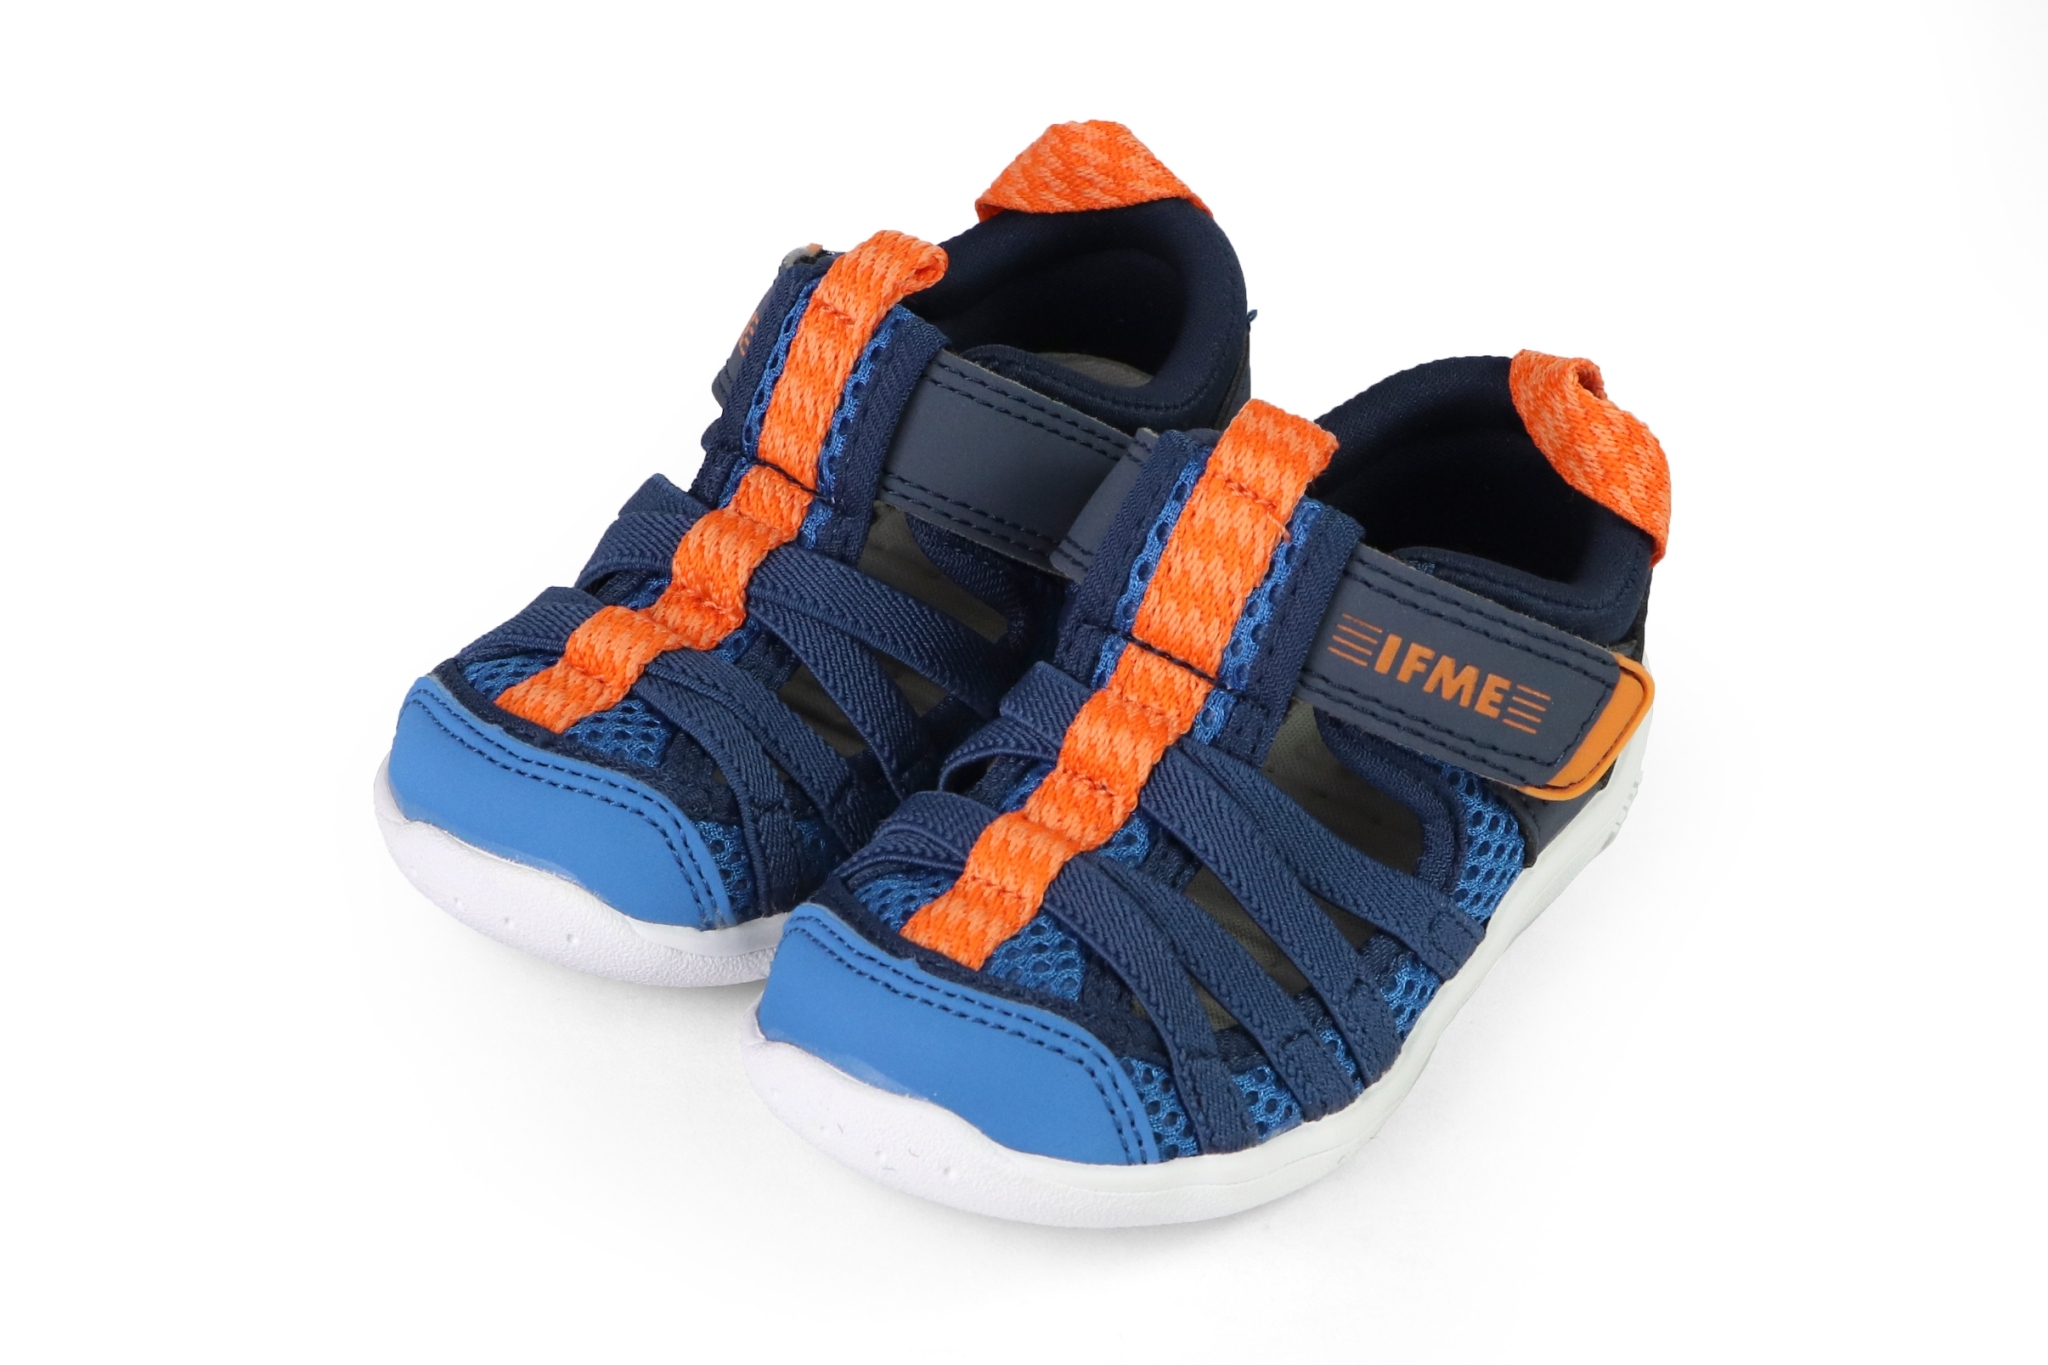 IFME Water Shoes